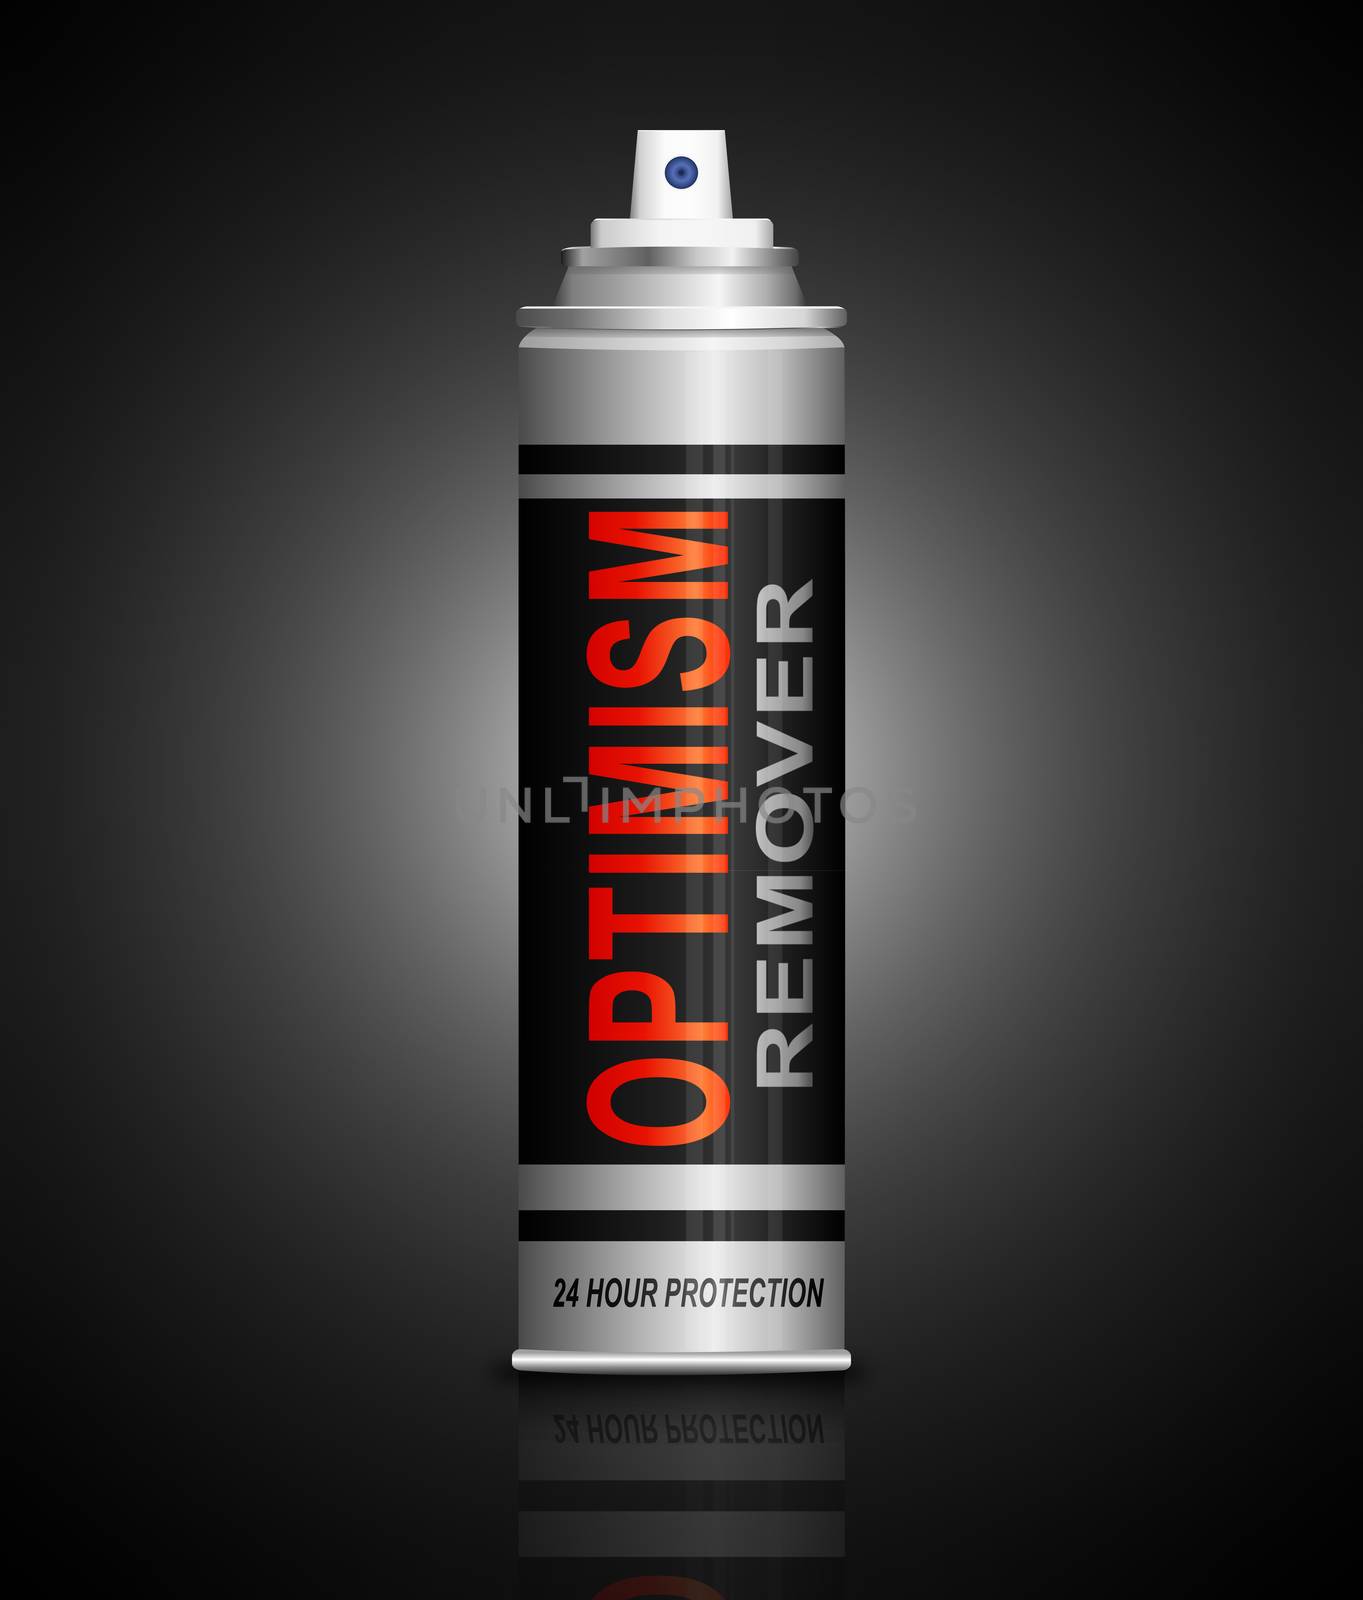 Optimism remover concept. by 72soul